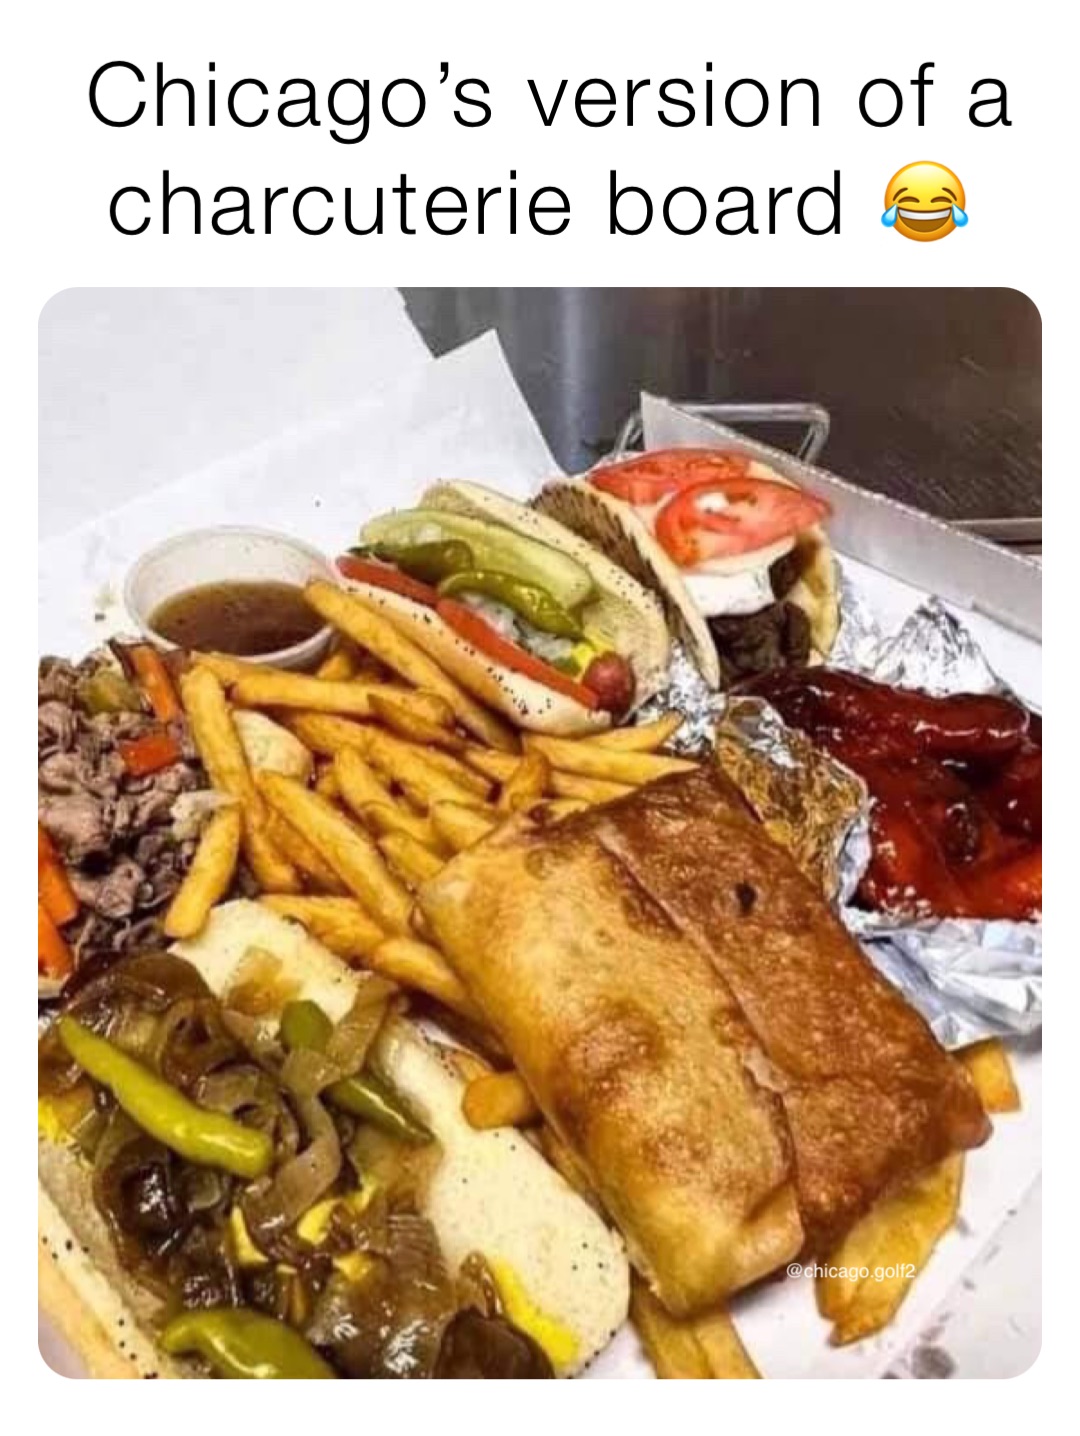 Chicago’s version of a charcuterie board 😂